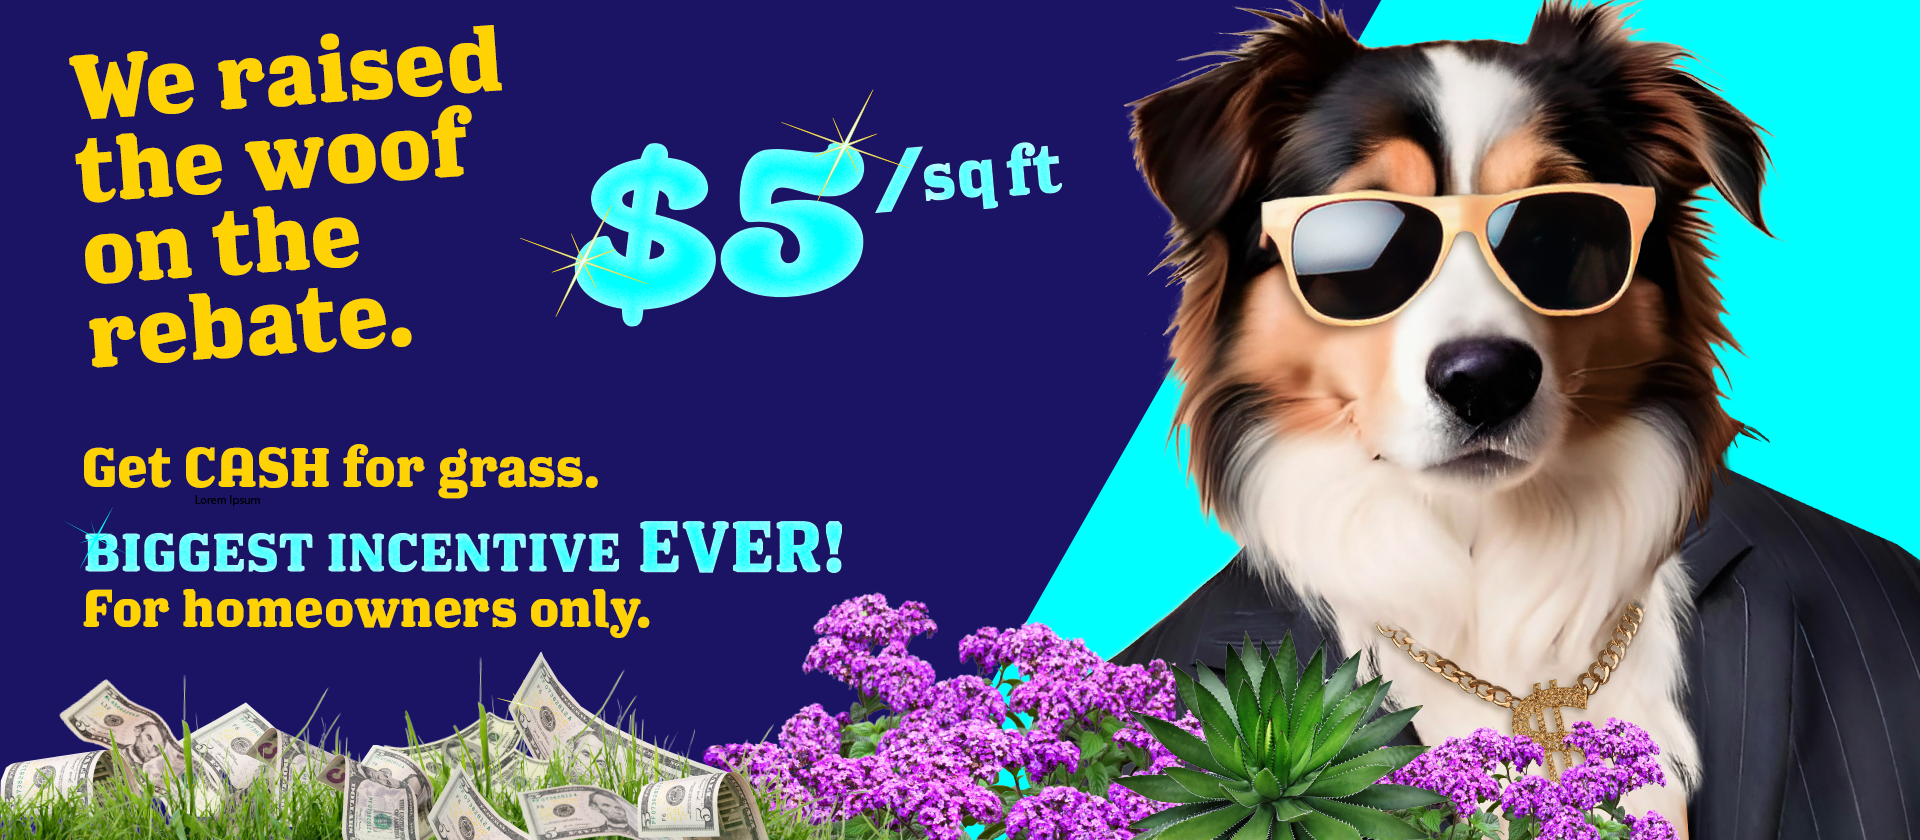 Dog wearing sun glasses and gold chain pitching a 5 dollar per square foot grass rebate.